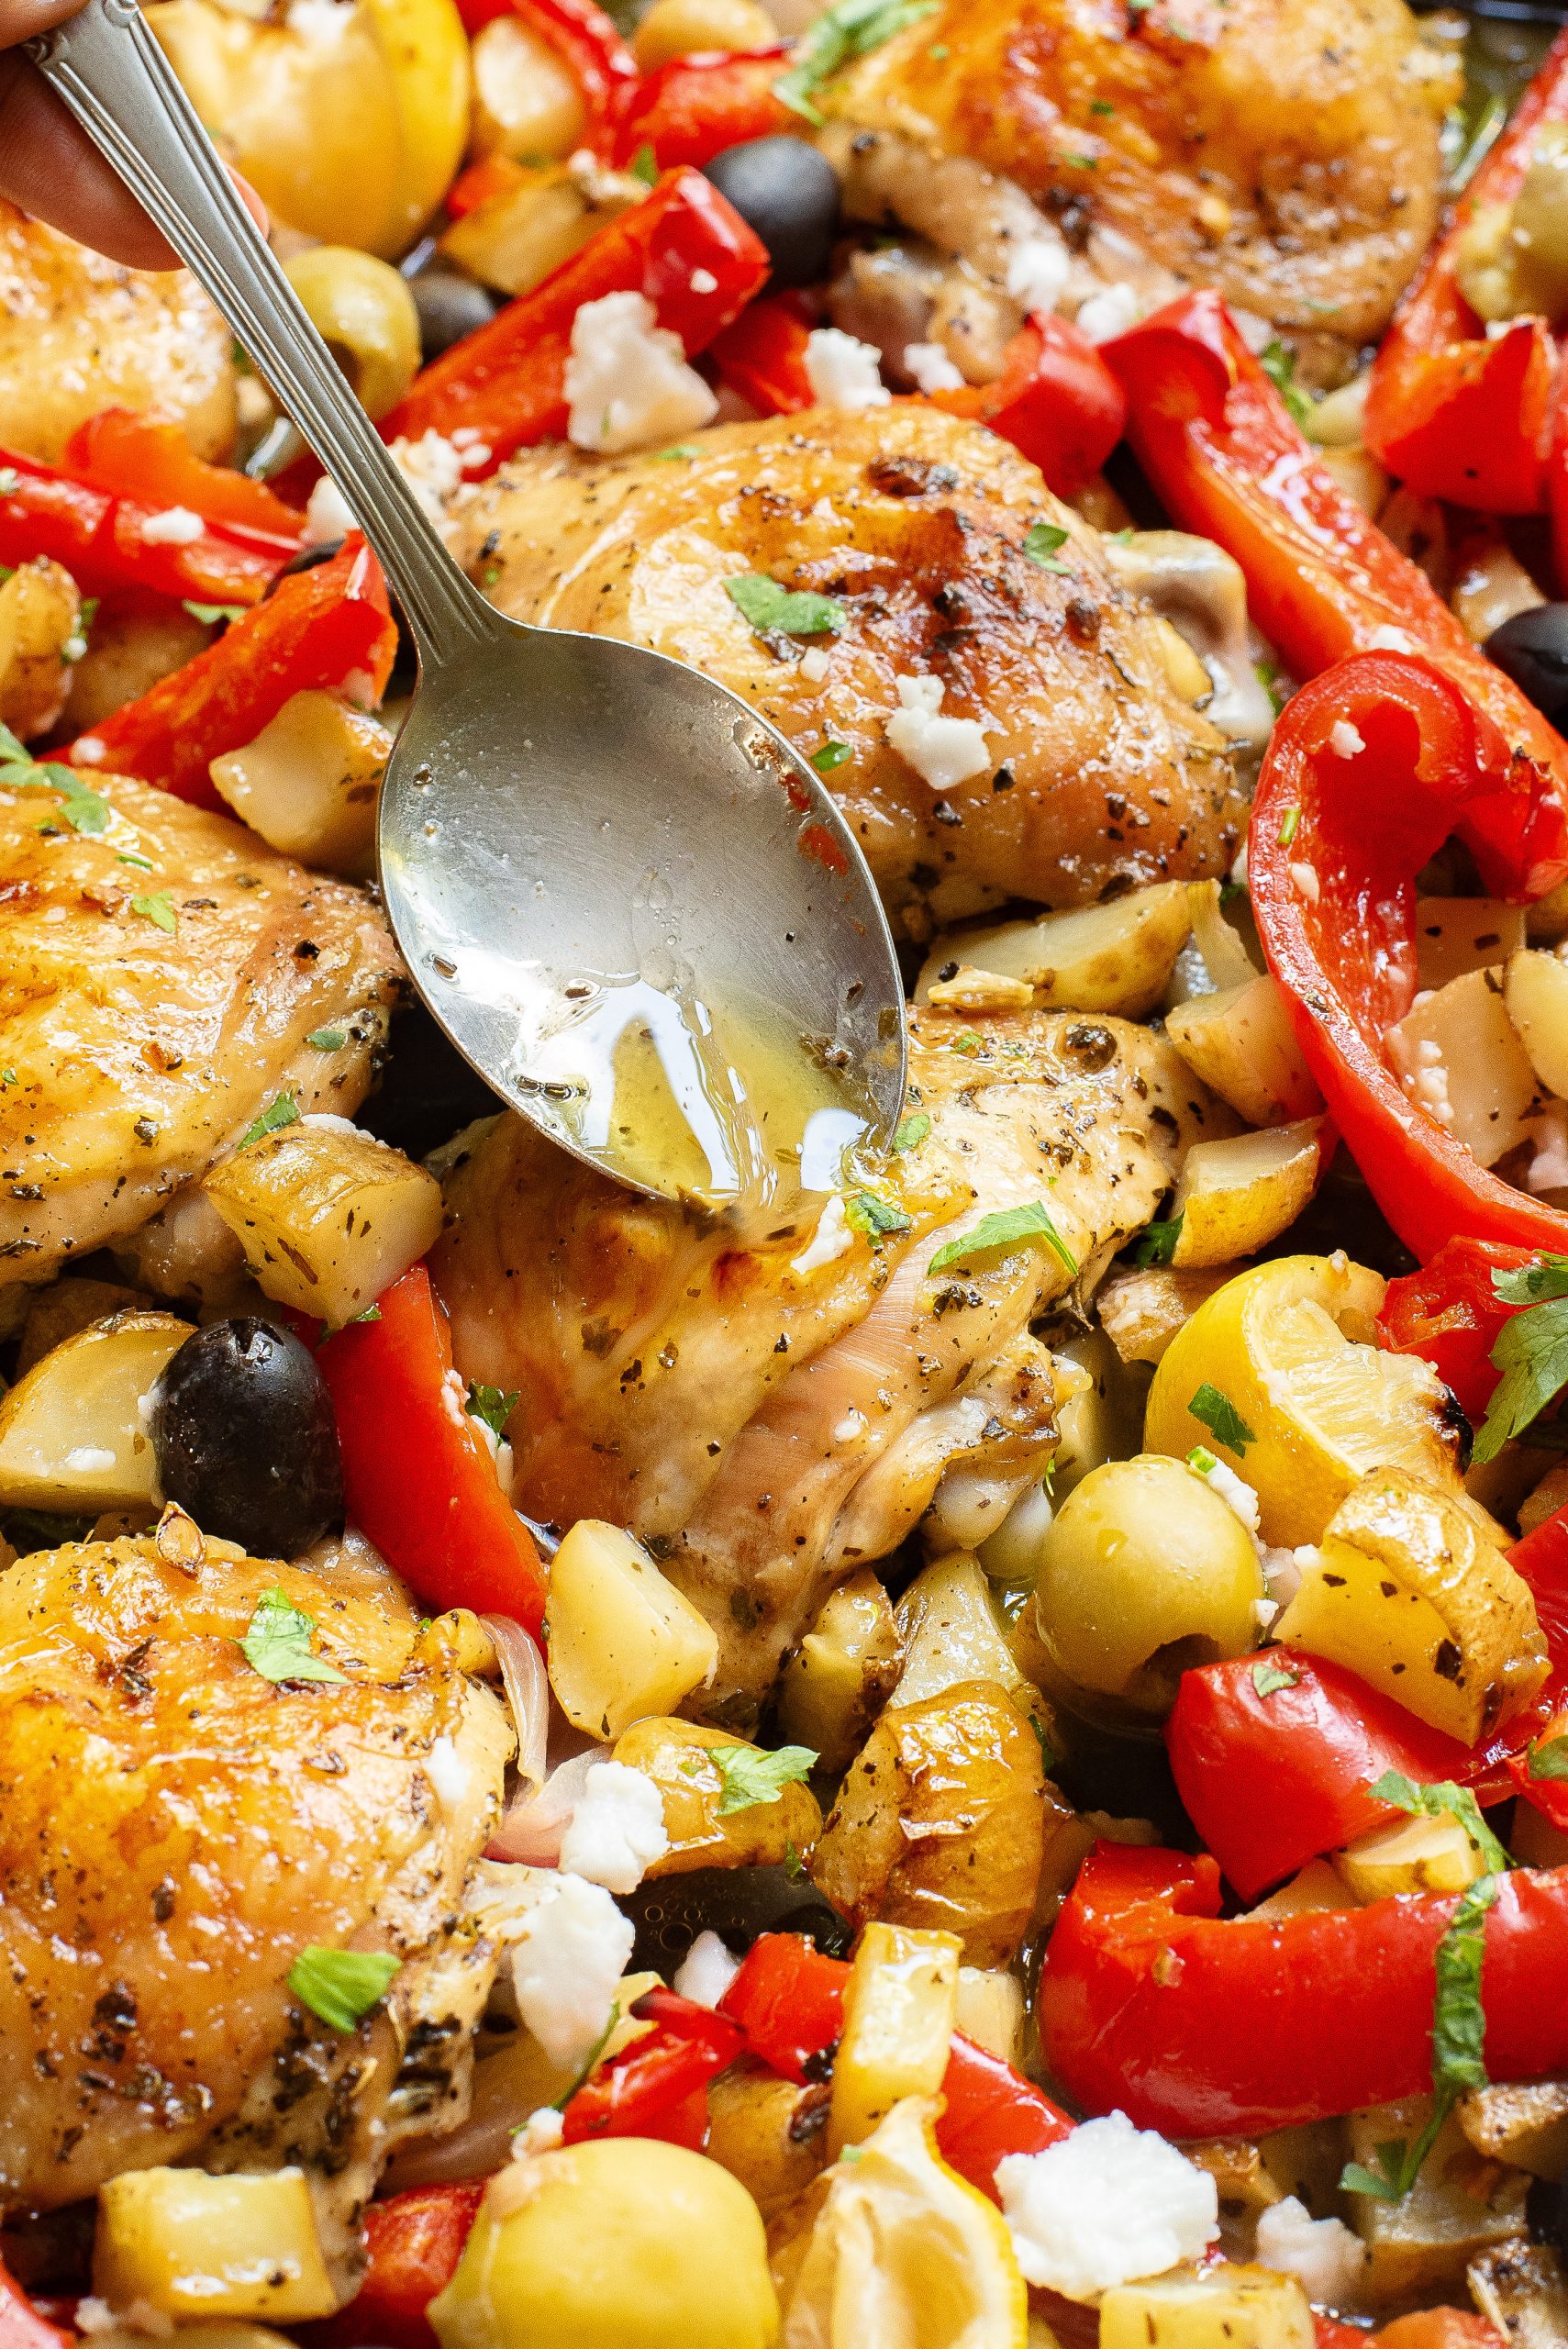 Drizzling sauce over a colorful mediterranean-style chicken and vegetable dish.